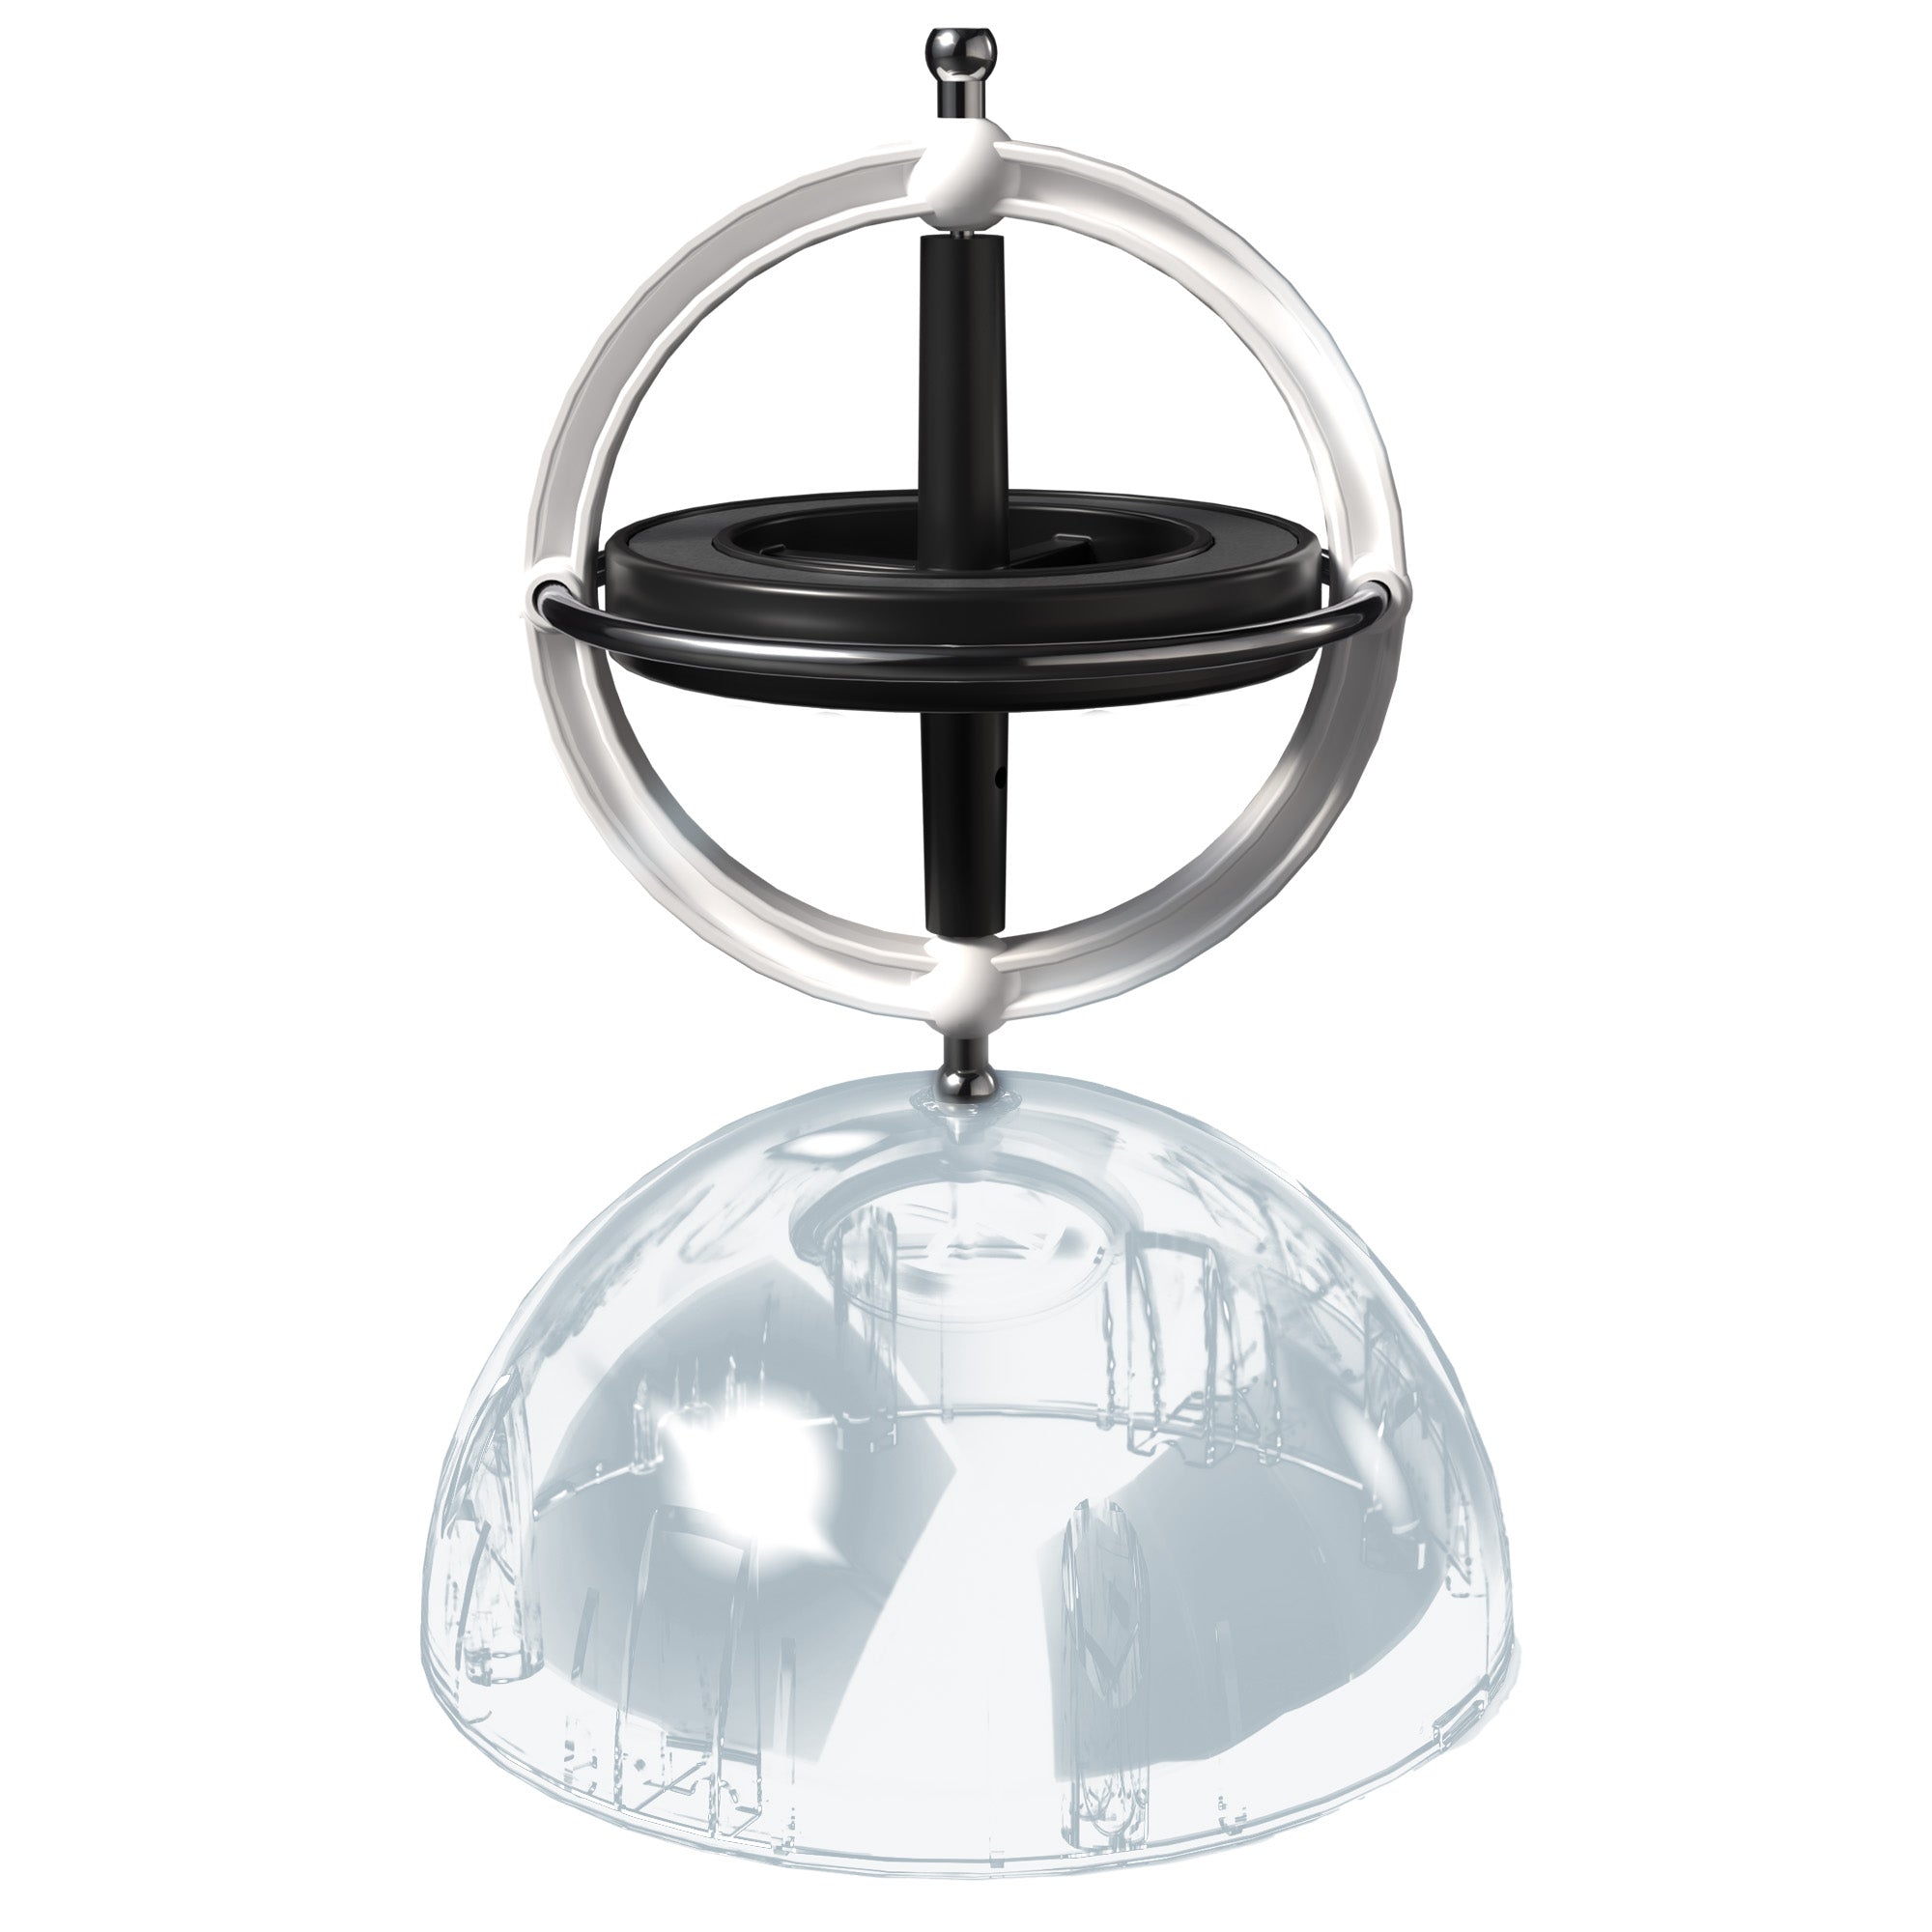 Gyroscope - The Essential, Spinning Physics Toy    